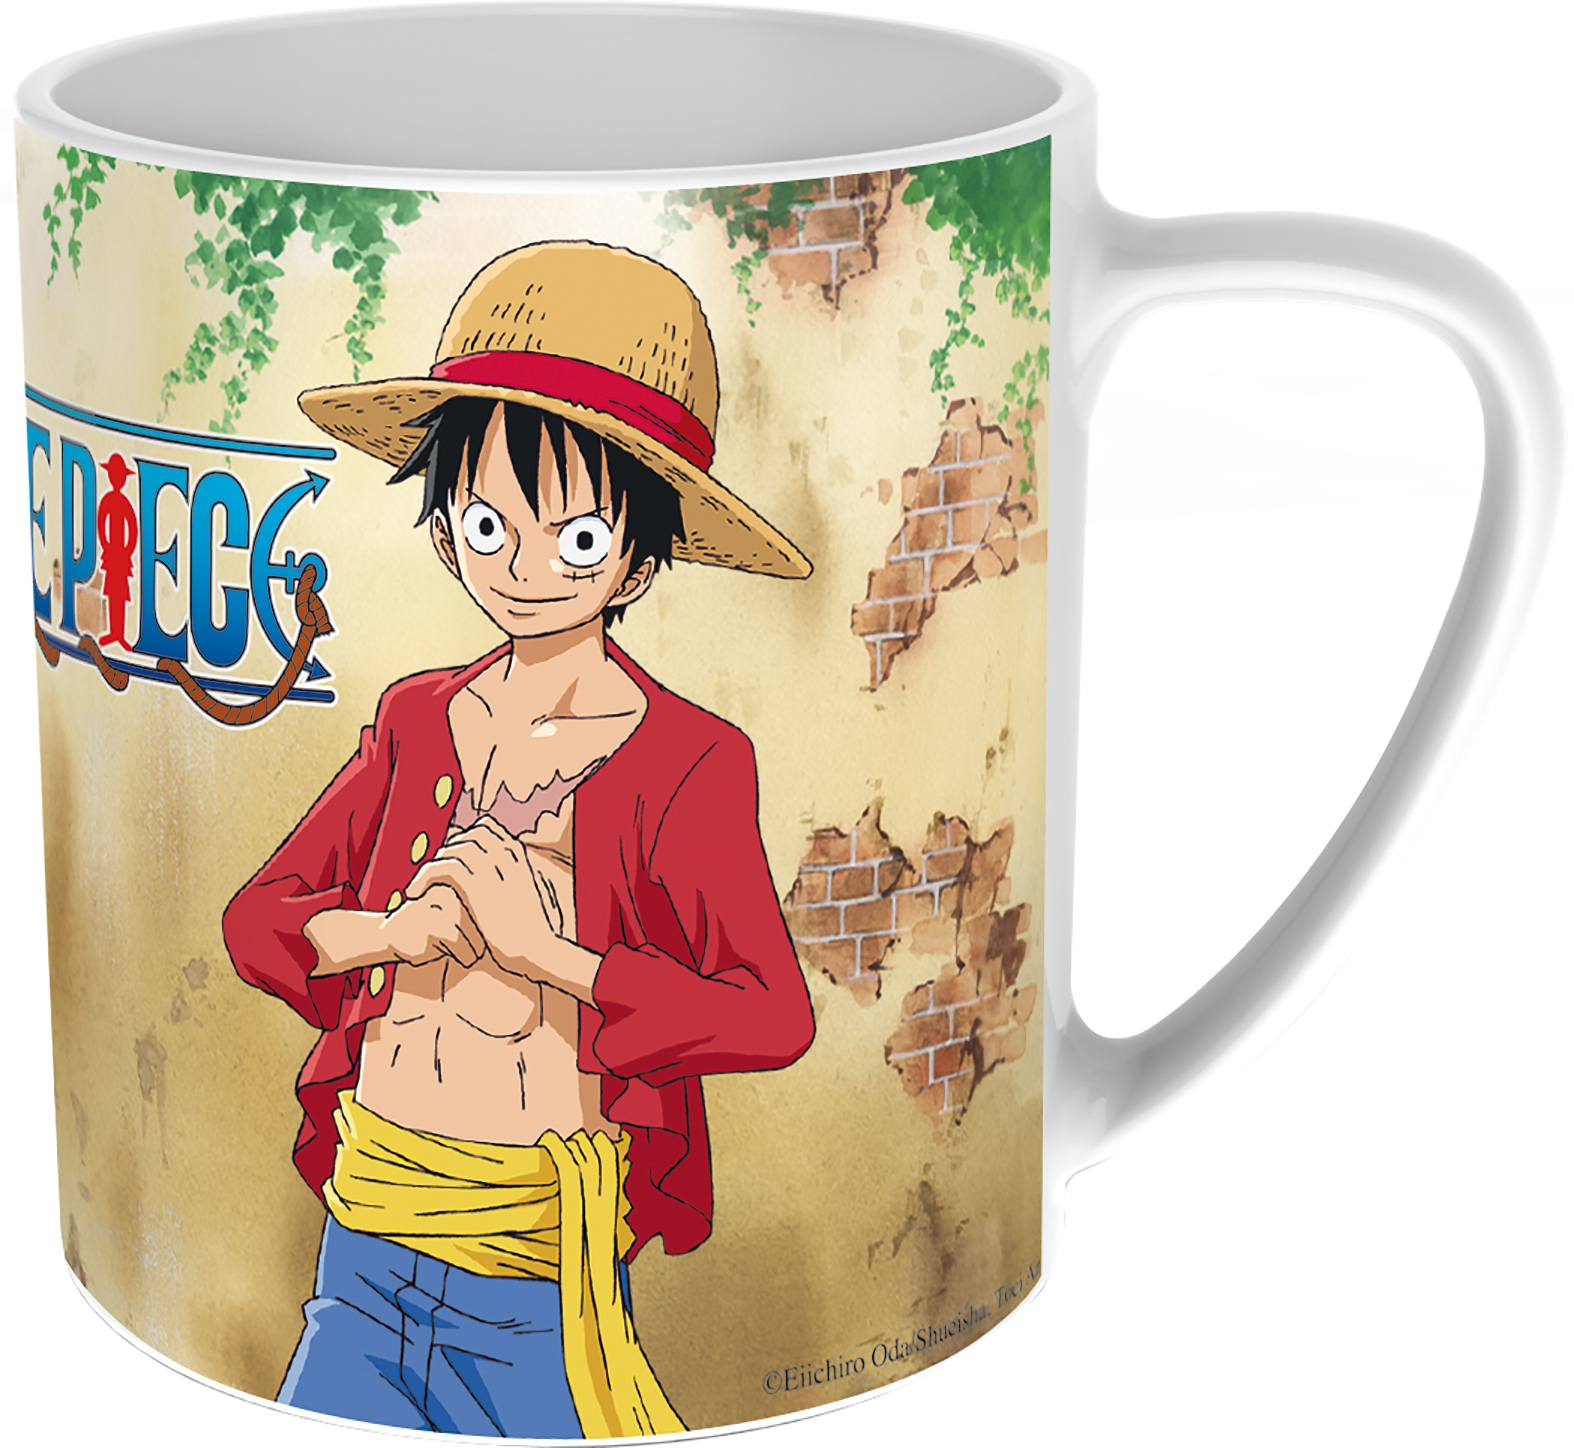 Tasse - One Piece Wanted